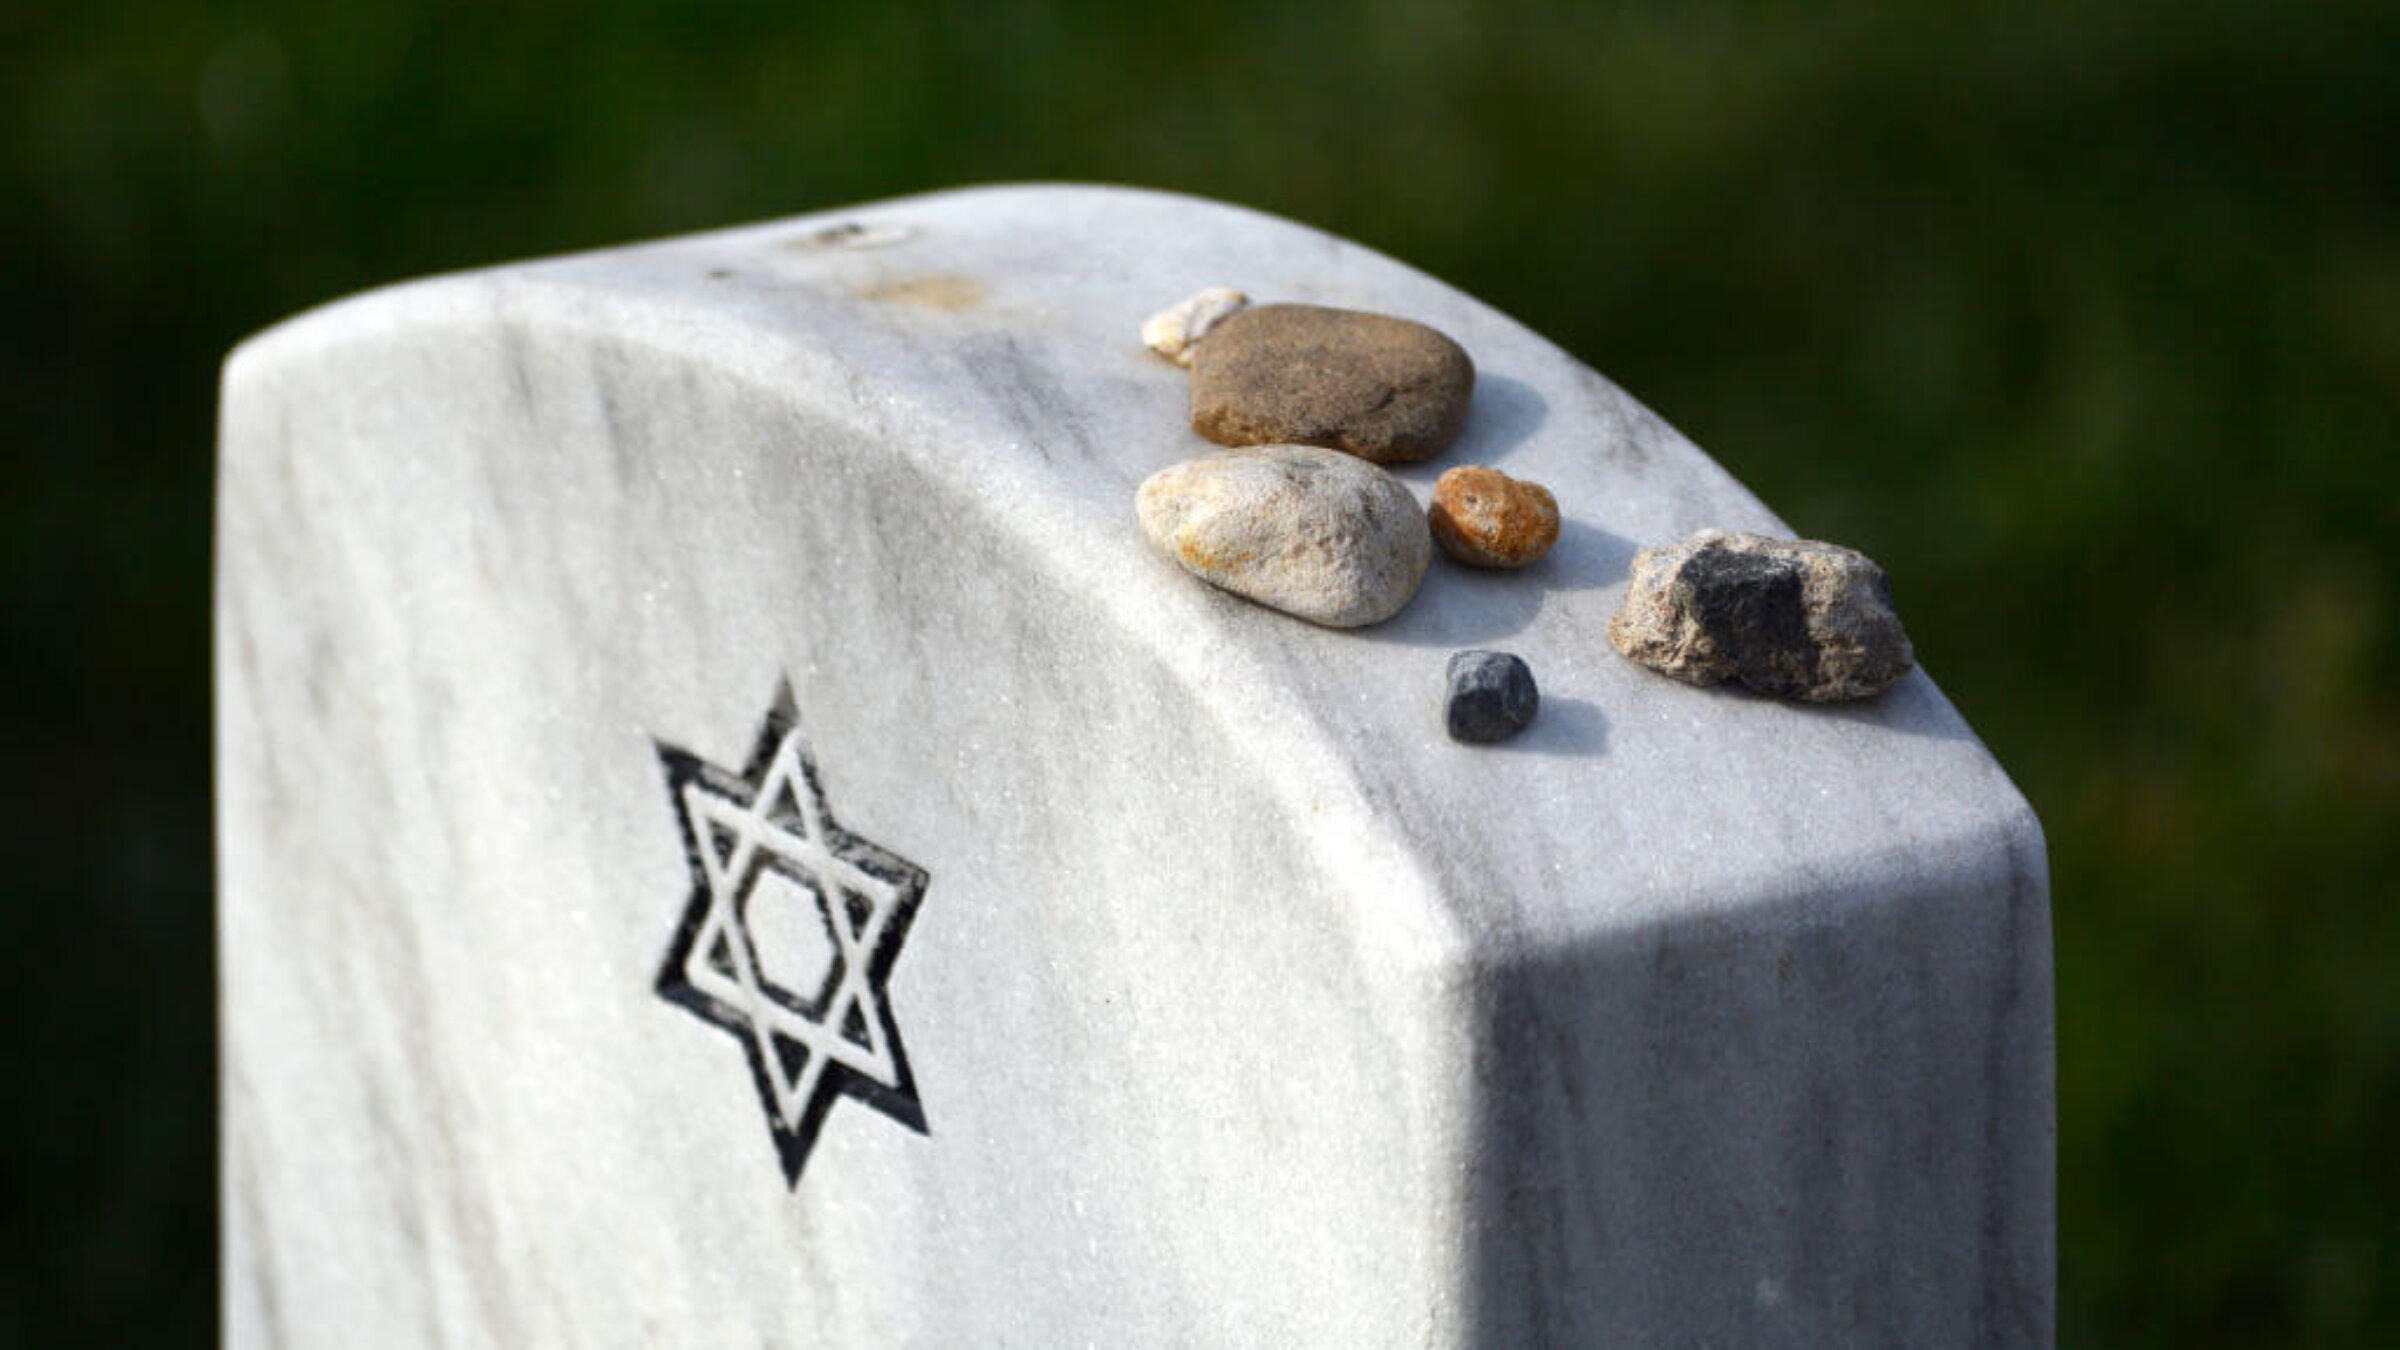 Stones placed by visitors on top of the tombstone of a Jewish U.S. military and World War II veteran at Arlington National Cemetery, April 22, 2018.